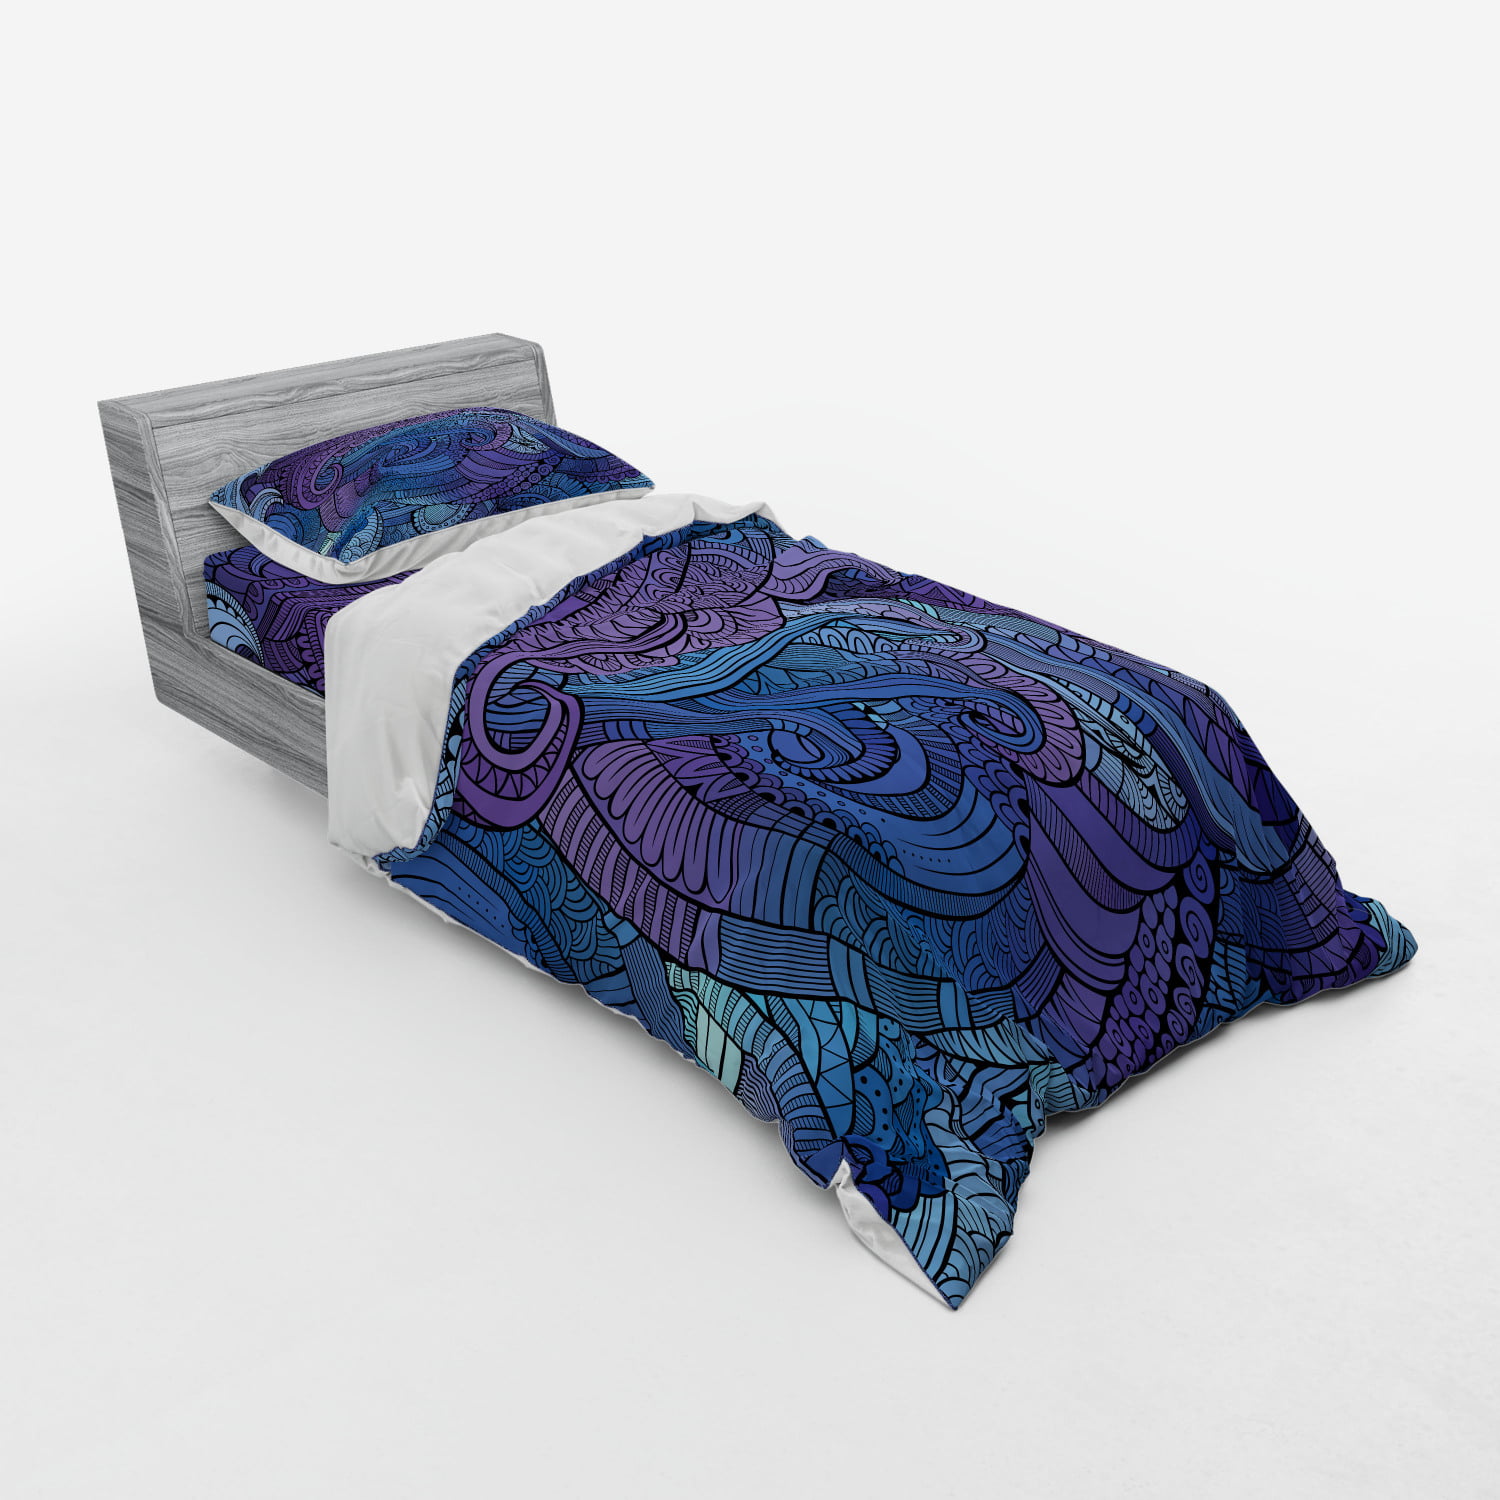 Abstract Duvet Cover Set, Ocean Inspired Graphic Paisley Swirled Hand Drawn  Artwork Print, Bedding Set with Shams and Fitted Sheet, Sizes, by  Ambesonne